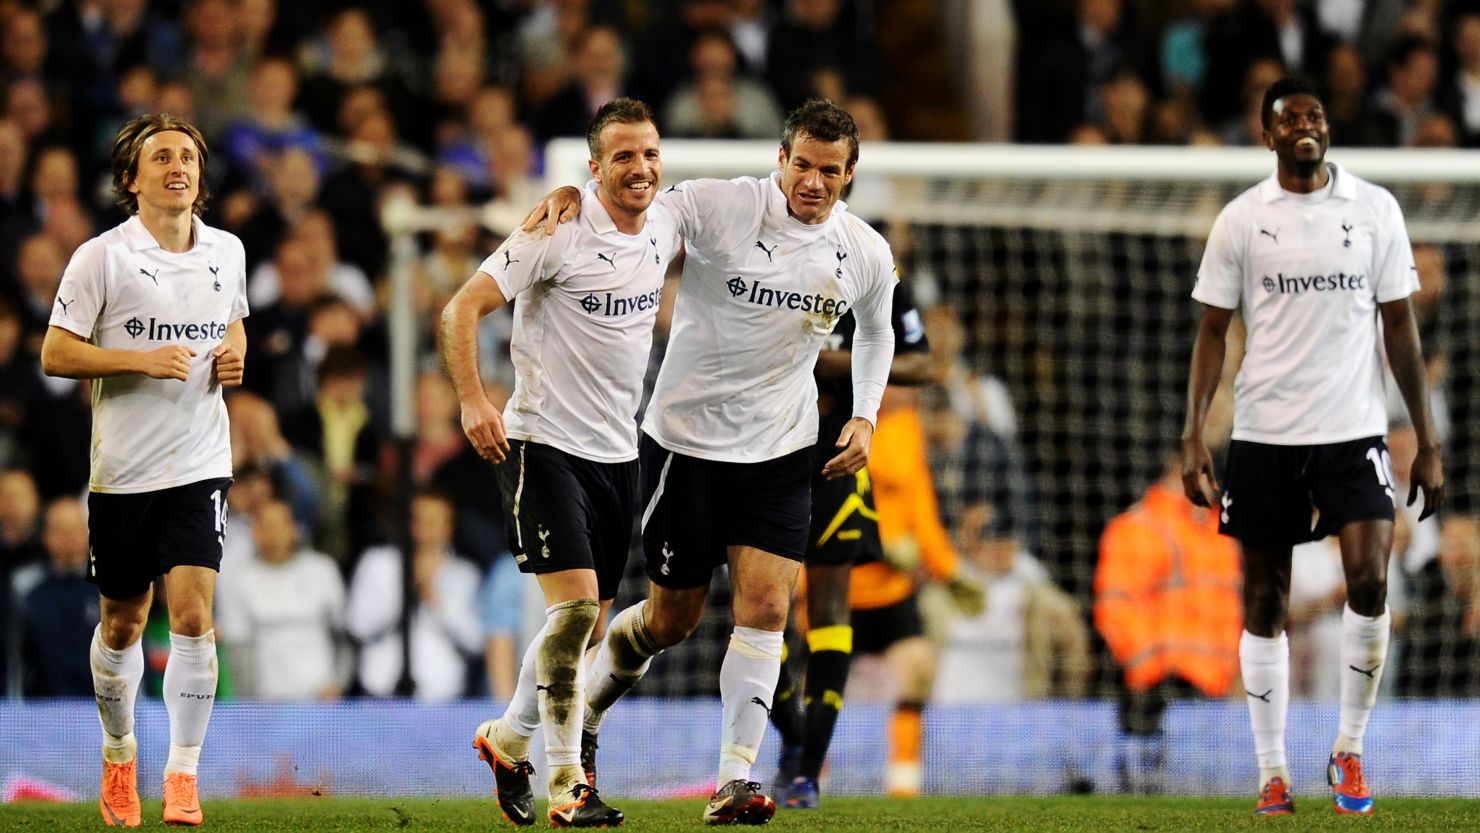 Ryan Nelsen (right) celebrates his goal as Tottenham beat Bolton 3-1 to reach the FA Cup semifinals.